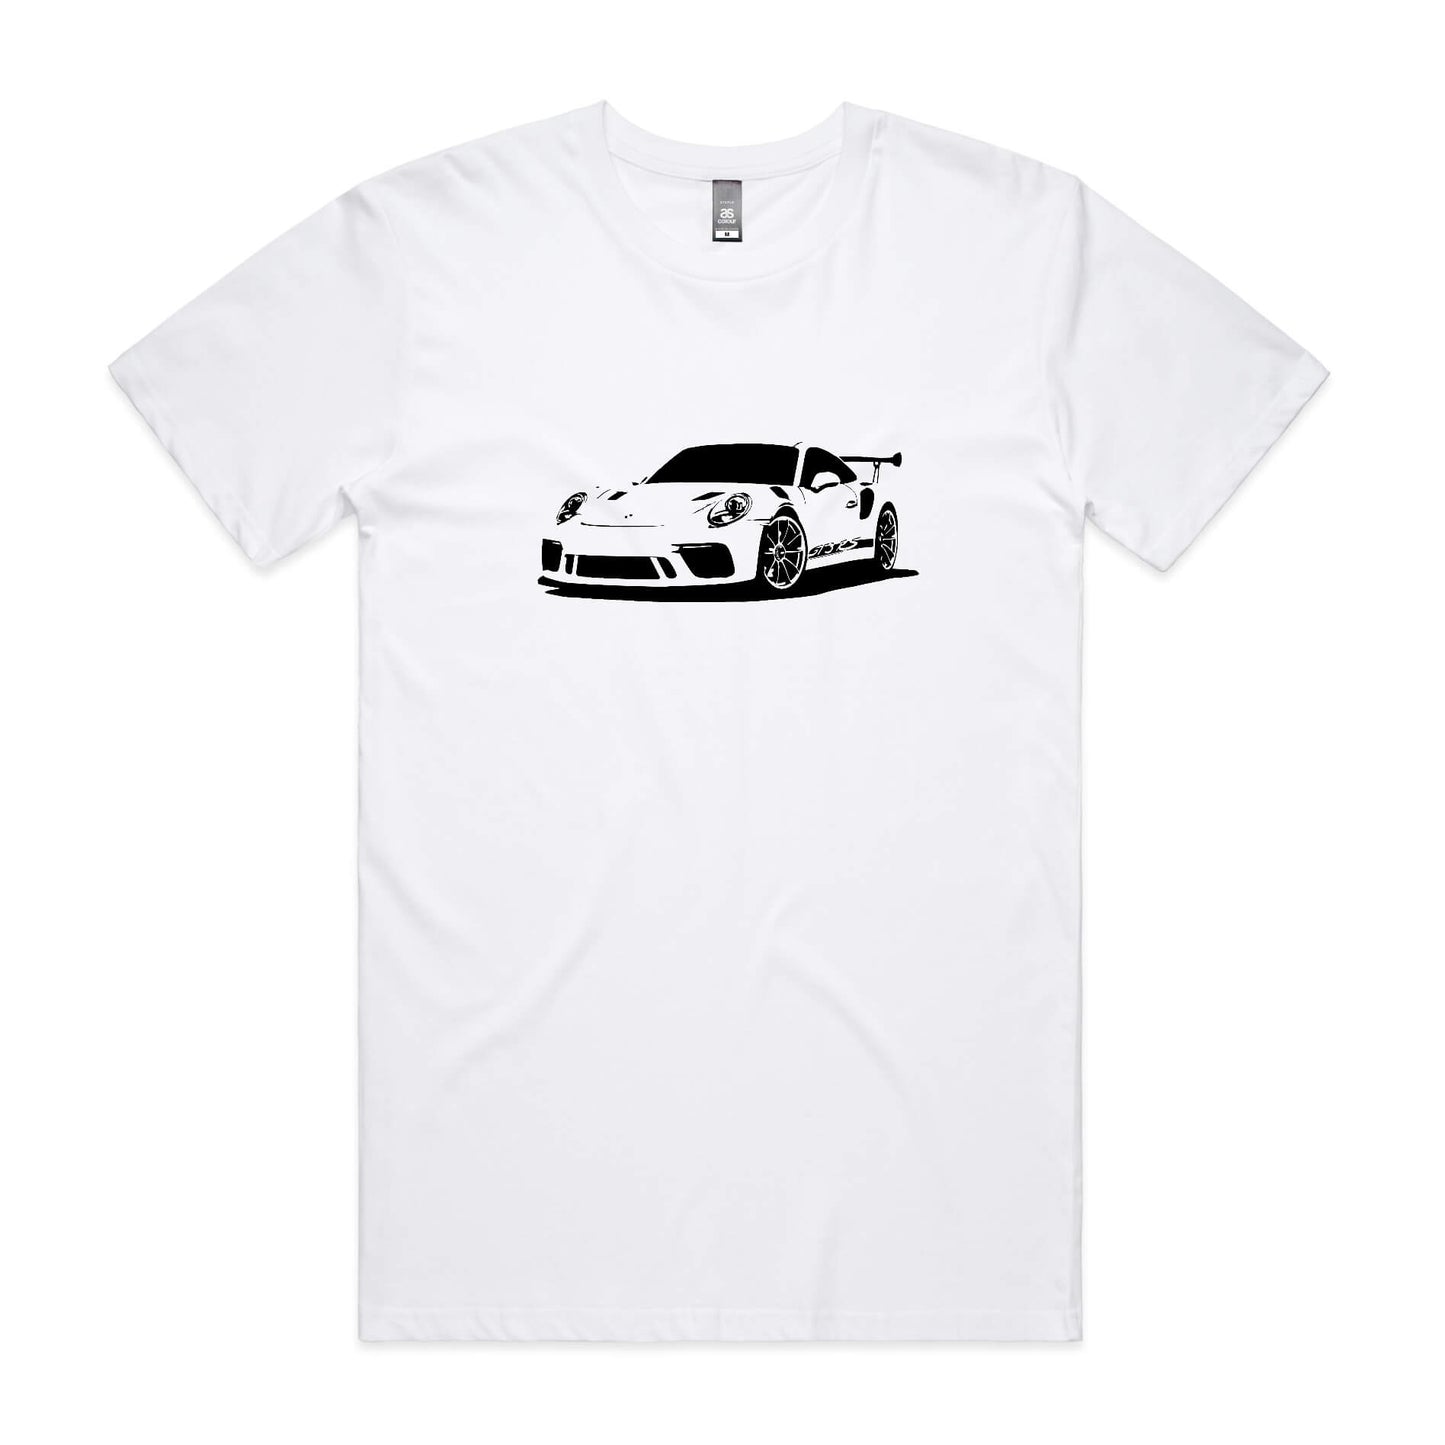 Porsche 911 GT3 RS t-shirt in white with a black car graphic